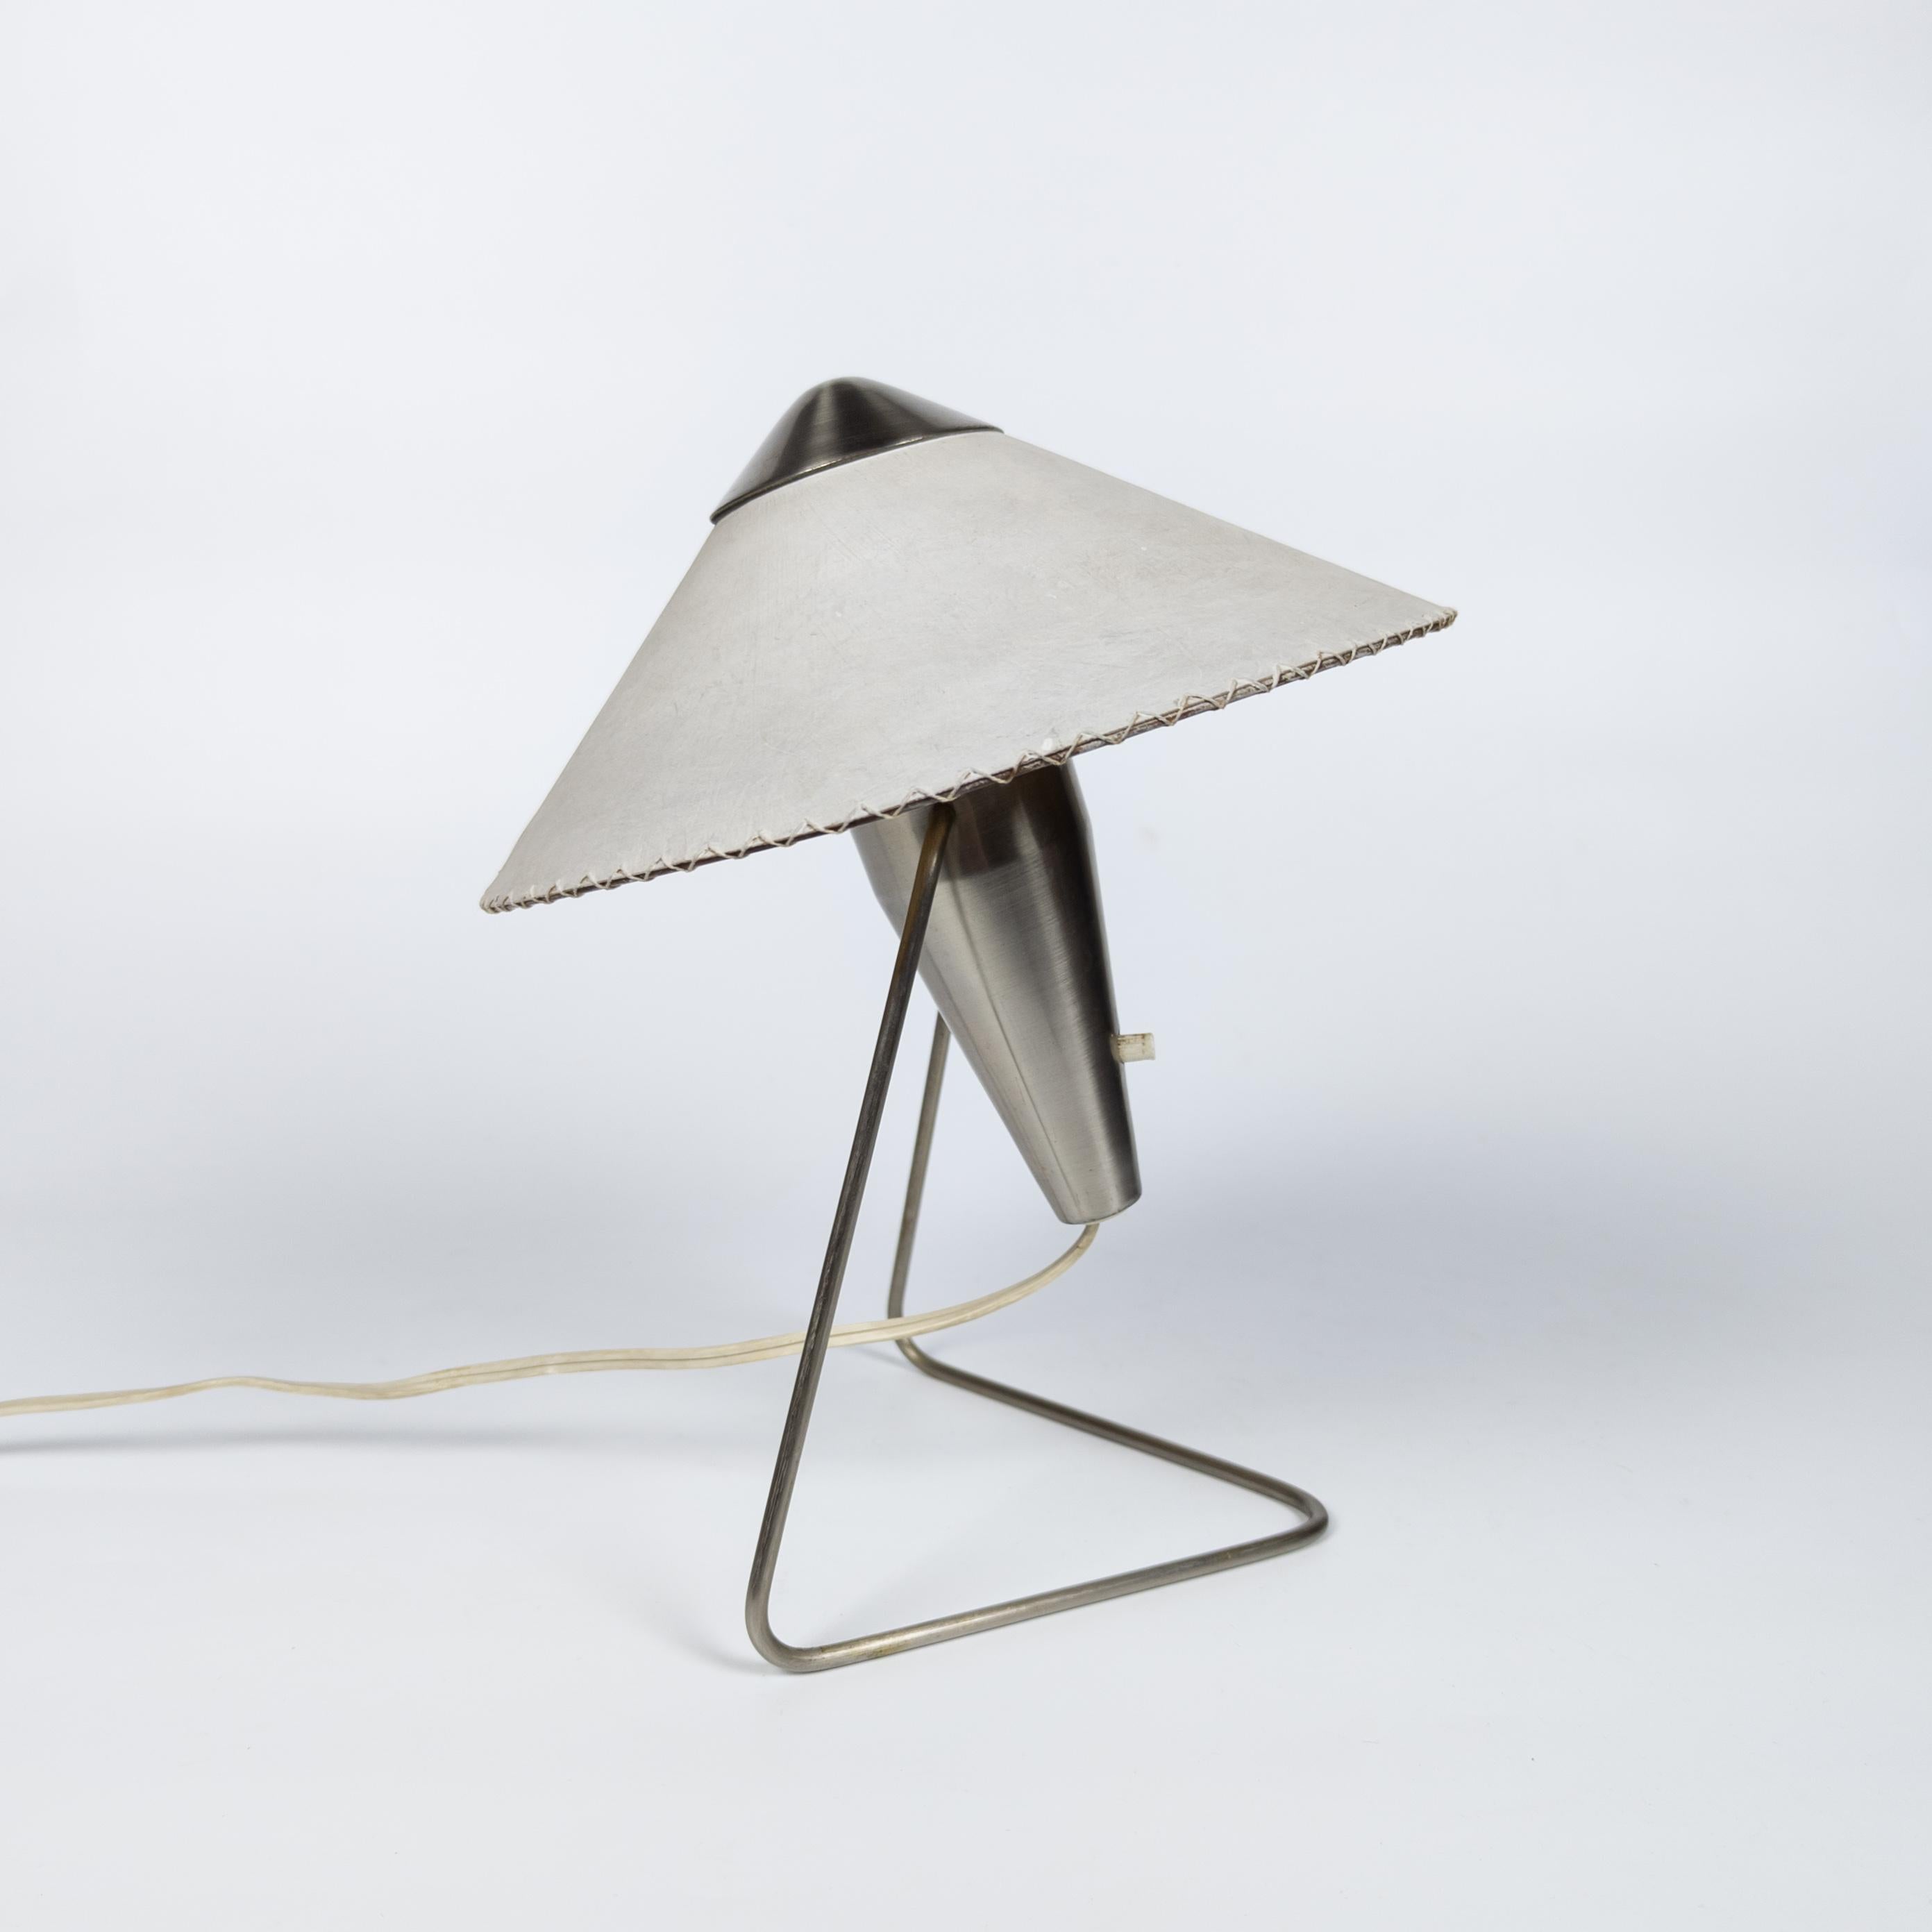 Small table or wall lamp created by Czech designer Helena Frantová in 1953. The lamp has a simple, modernist yet sophisticated design. The body of the lamp is made of nickel plated steel. The round lamp shade with a shape reminiscent of the